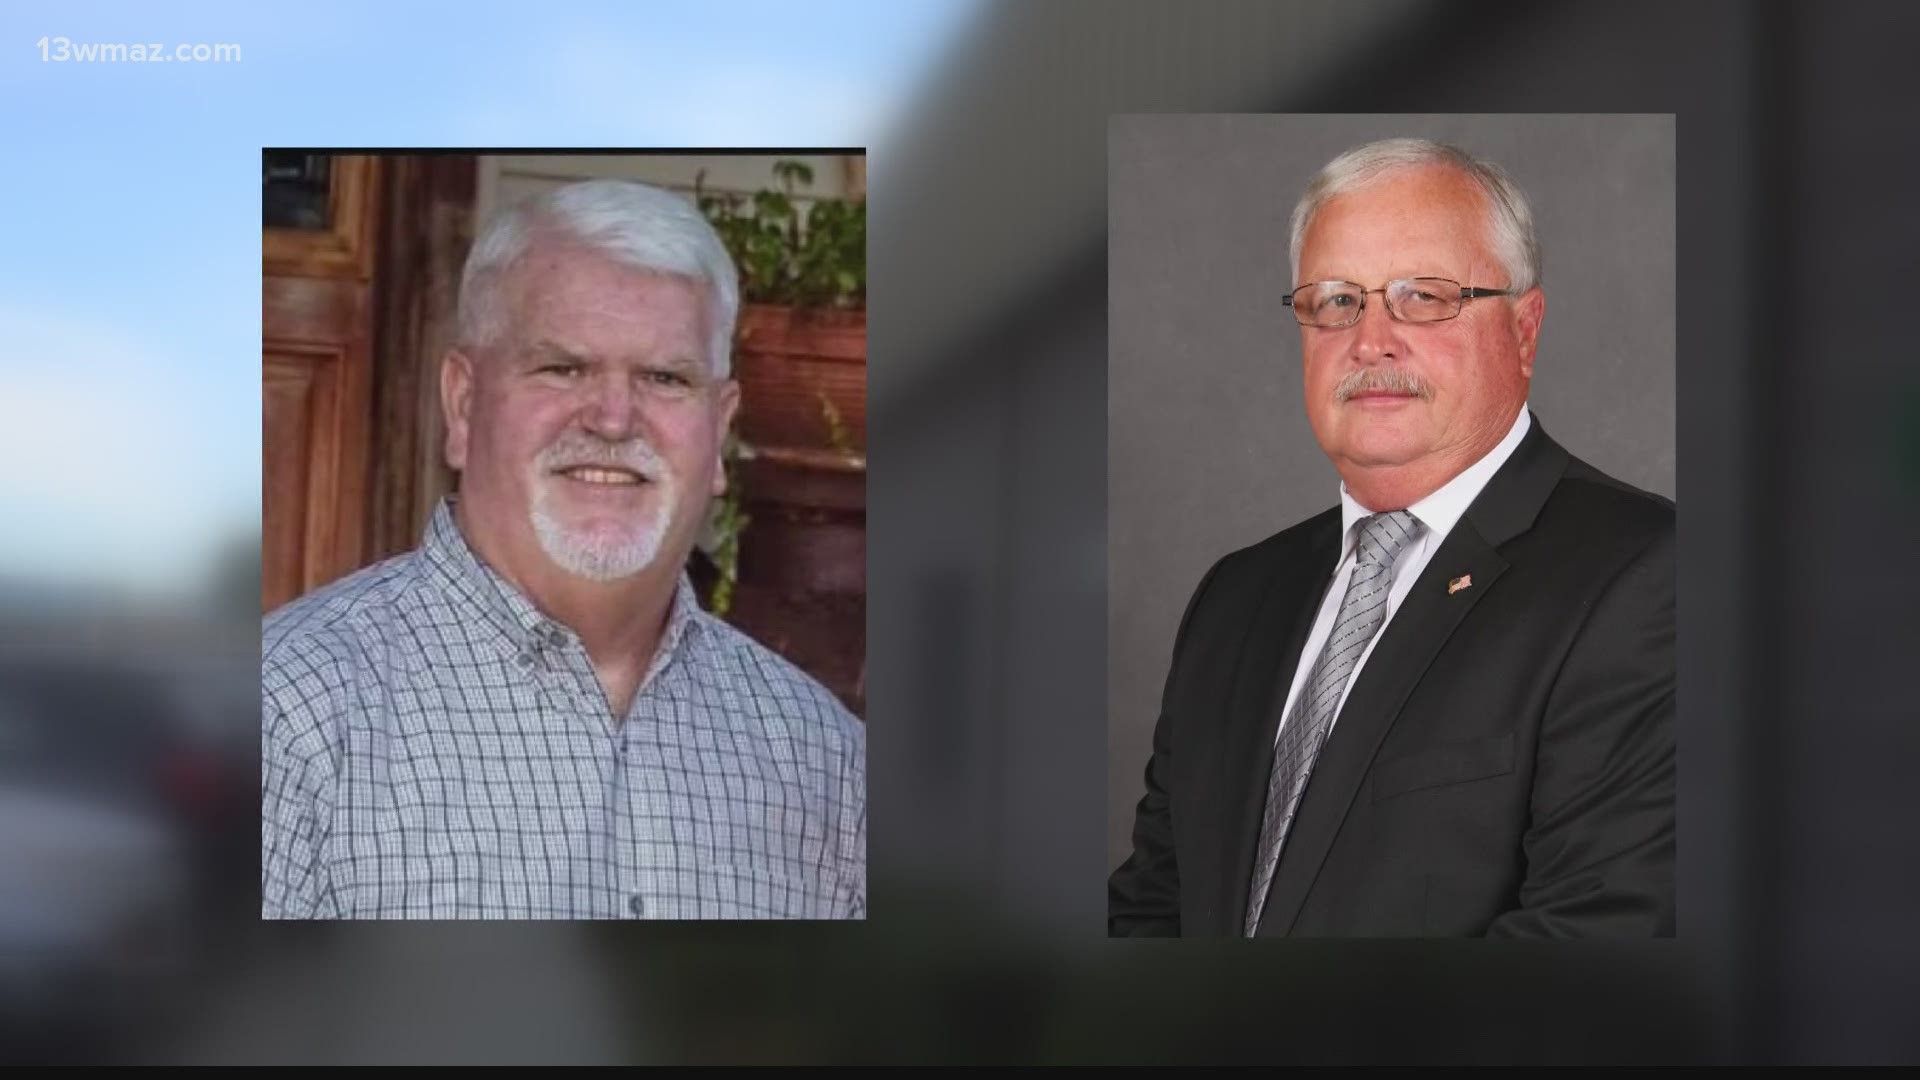 Voters in Laurens County will elect a new sheriff this year or vote to keep the incumbent in office. Sheriff Larry Dean is being challenged by Marshall Floyd.